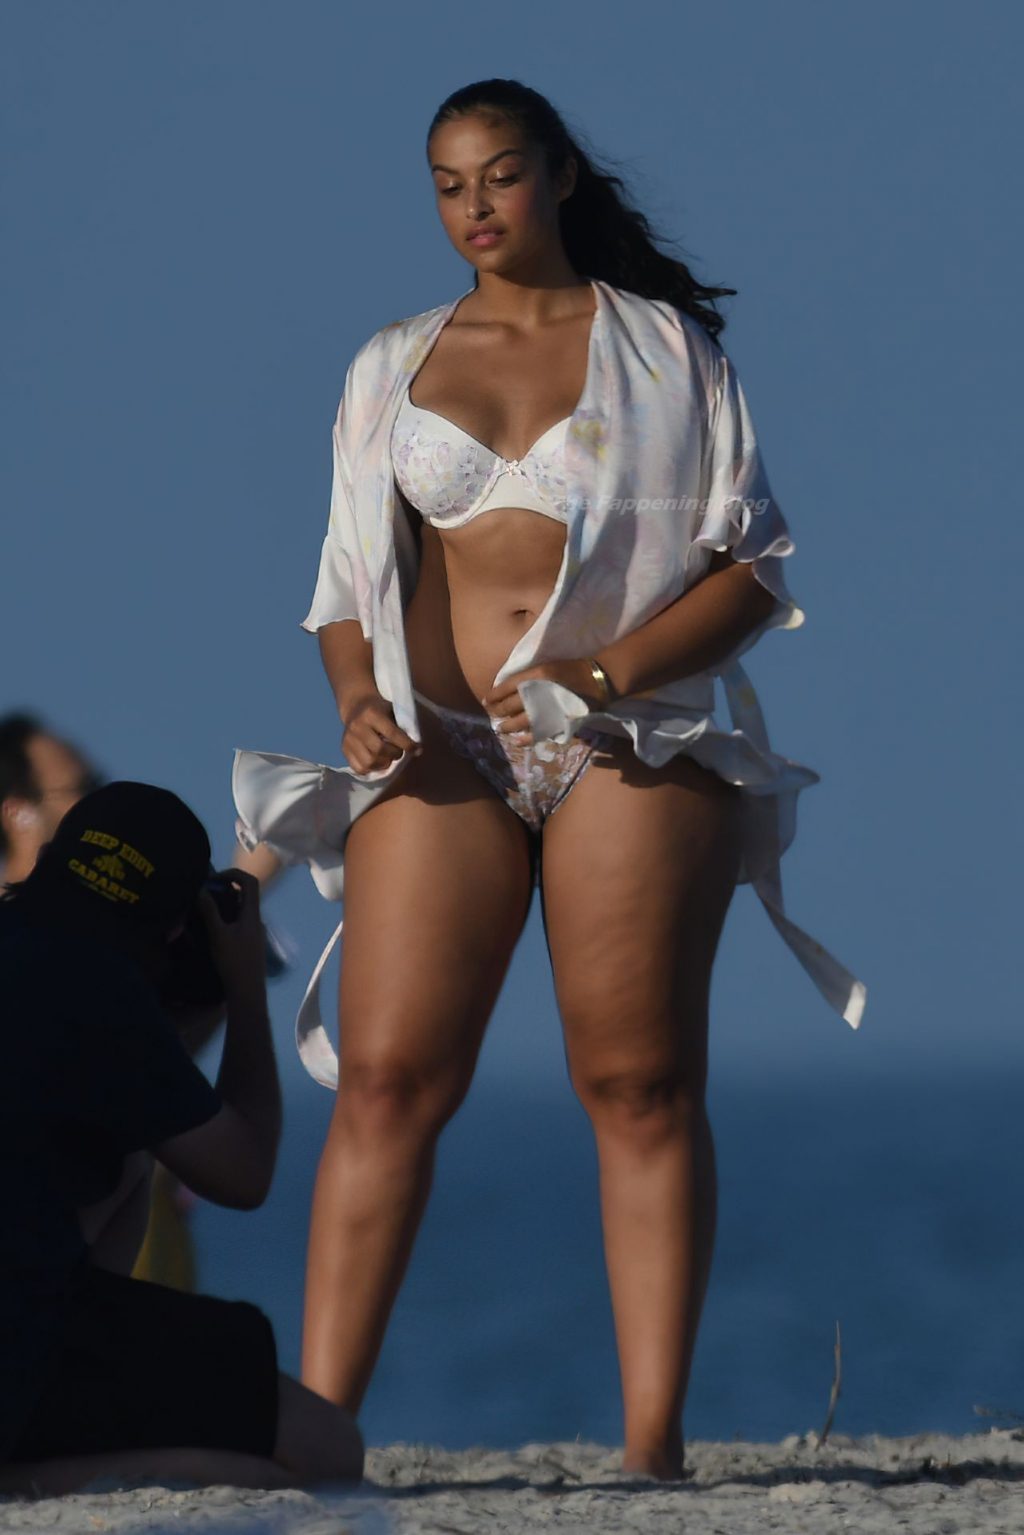 Devyn Garcia Poses in Lingerie During a Victoria’s Secret Photoshoot on the Beach in Miami (37 Photos)